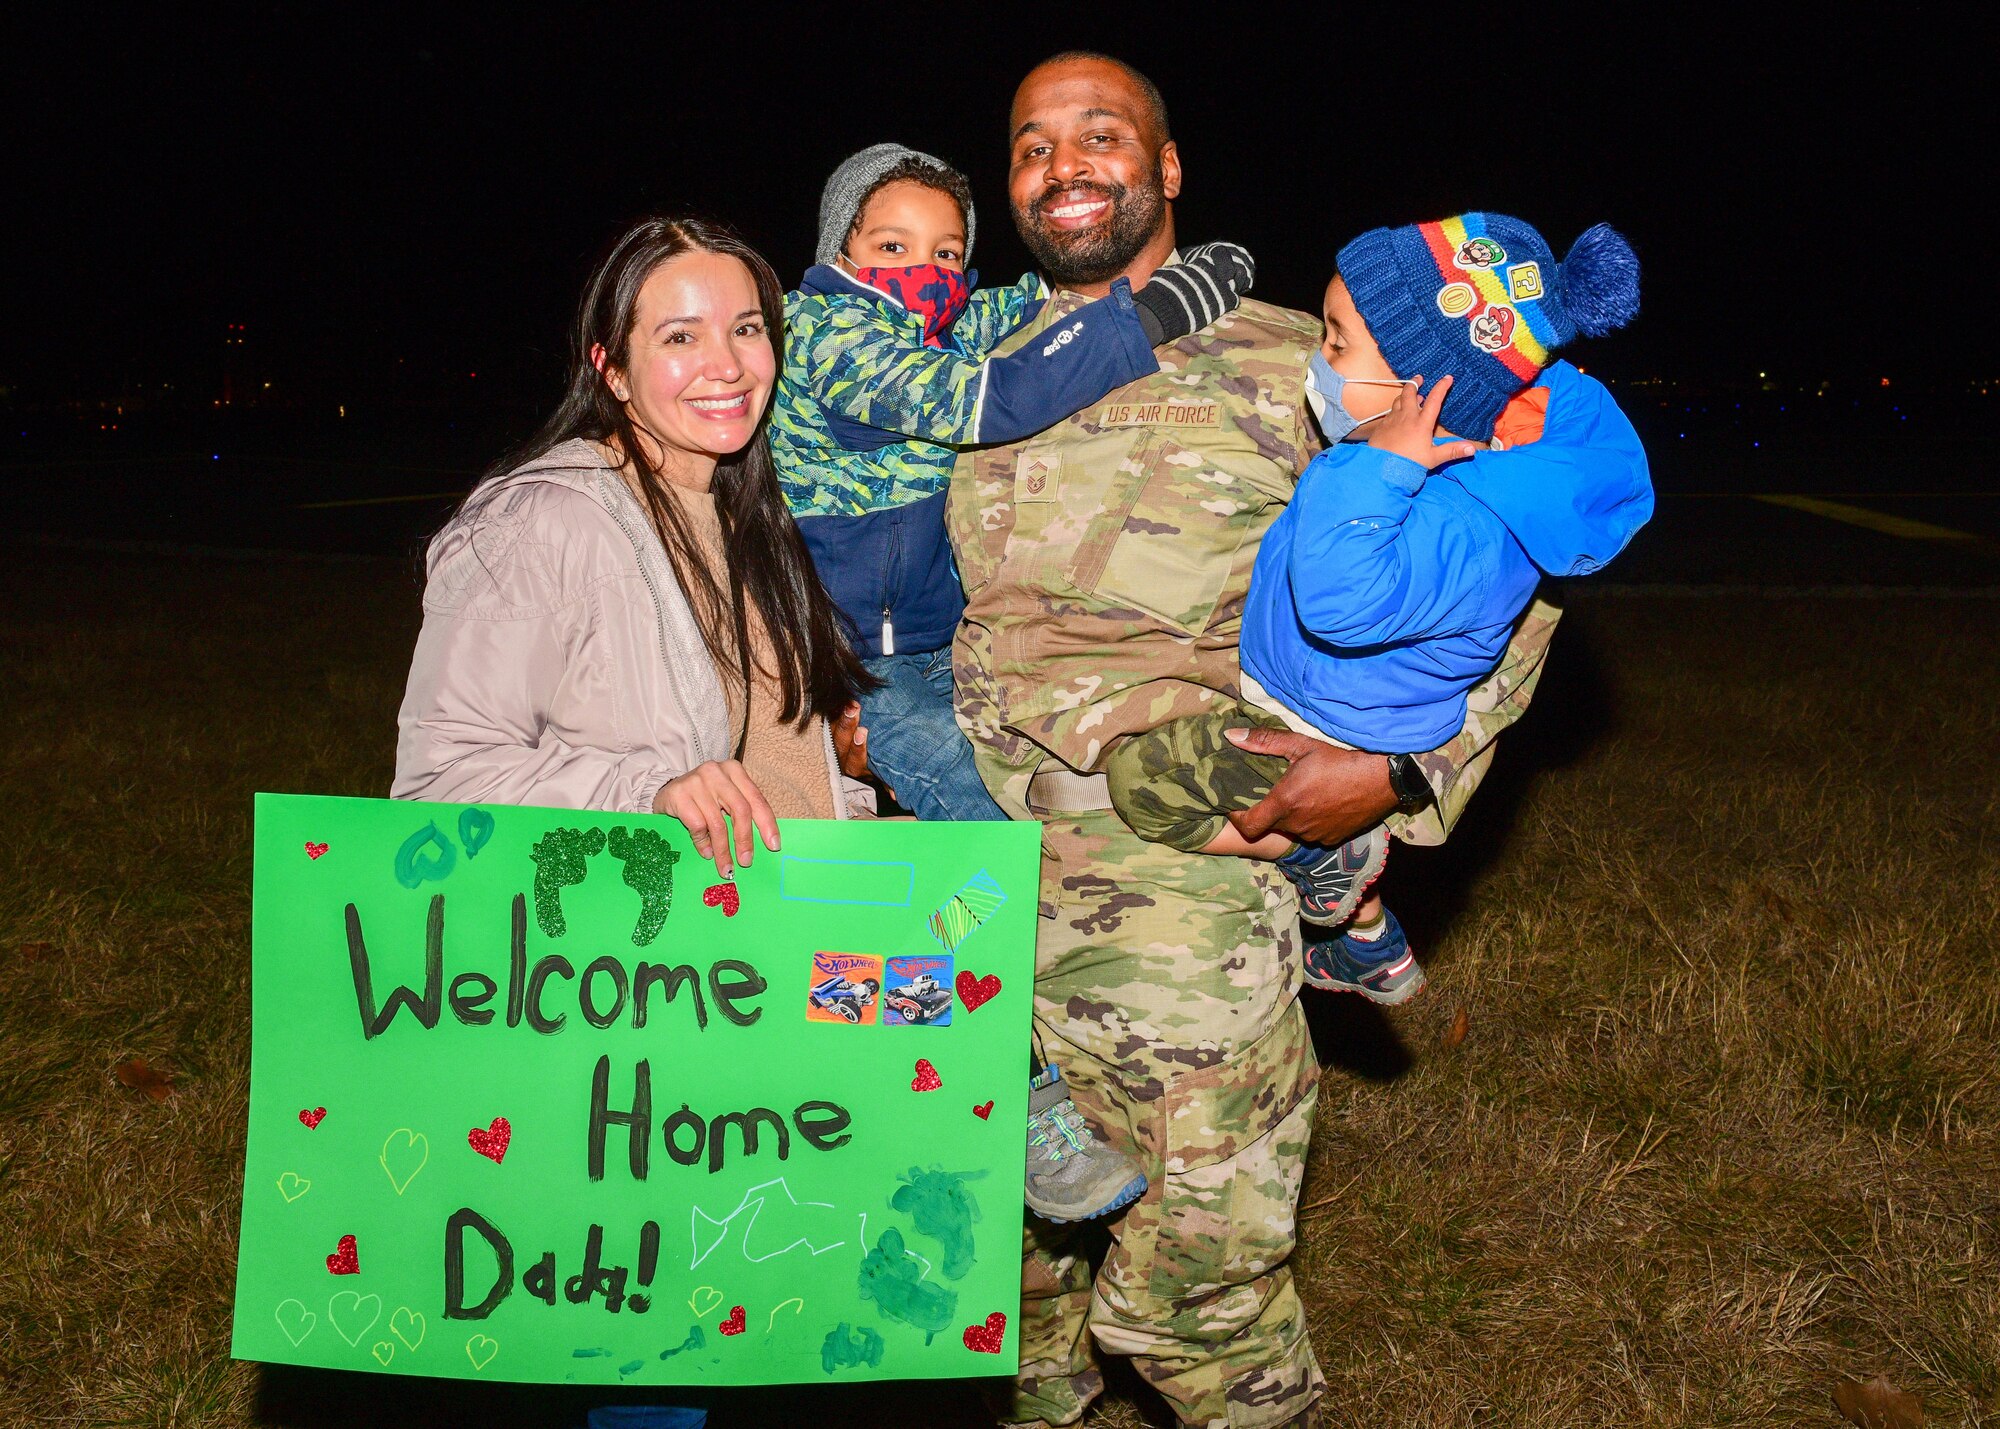 A U.S. Air Force Airman assigned to the 56th Rescue Squadron poses for a photo with his family after returning from a deployment, at Aviano Air Base, Italy, Feb. 9, 2022. Airmen with the 56th RQS and 56th Helicopter Maintenance Unit received a warm welcome from families, friends and coworkers after returning from their deployment. (U.S. Air Force photo by Senior Airman Brooke Moeder)